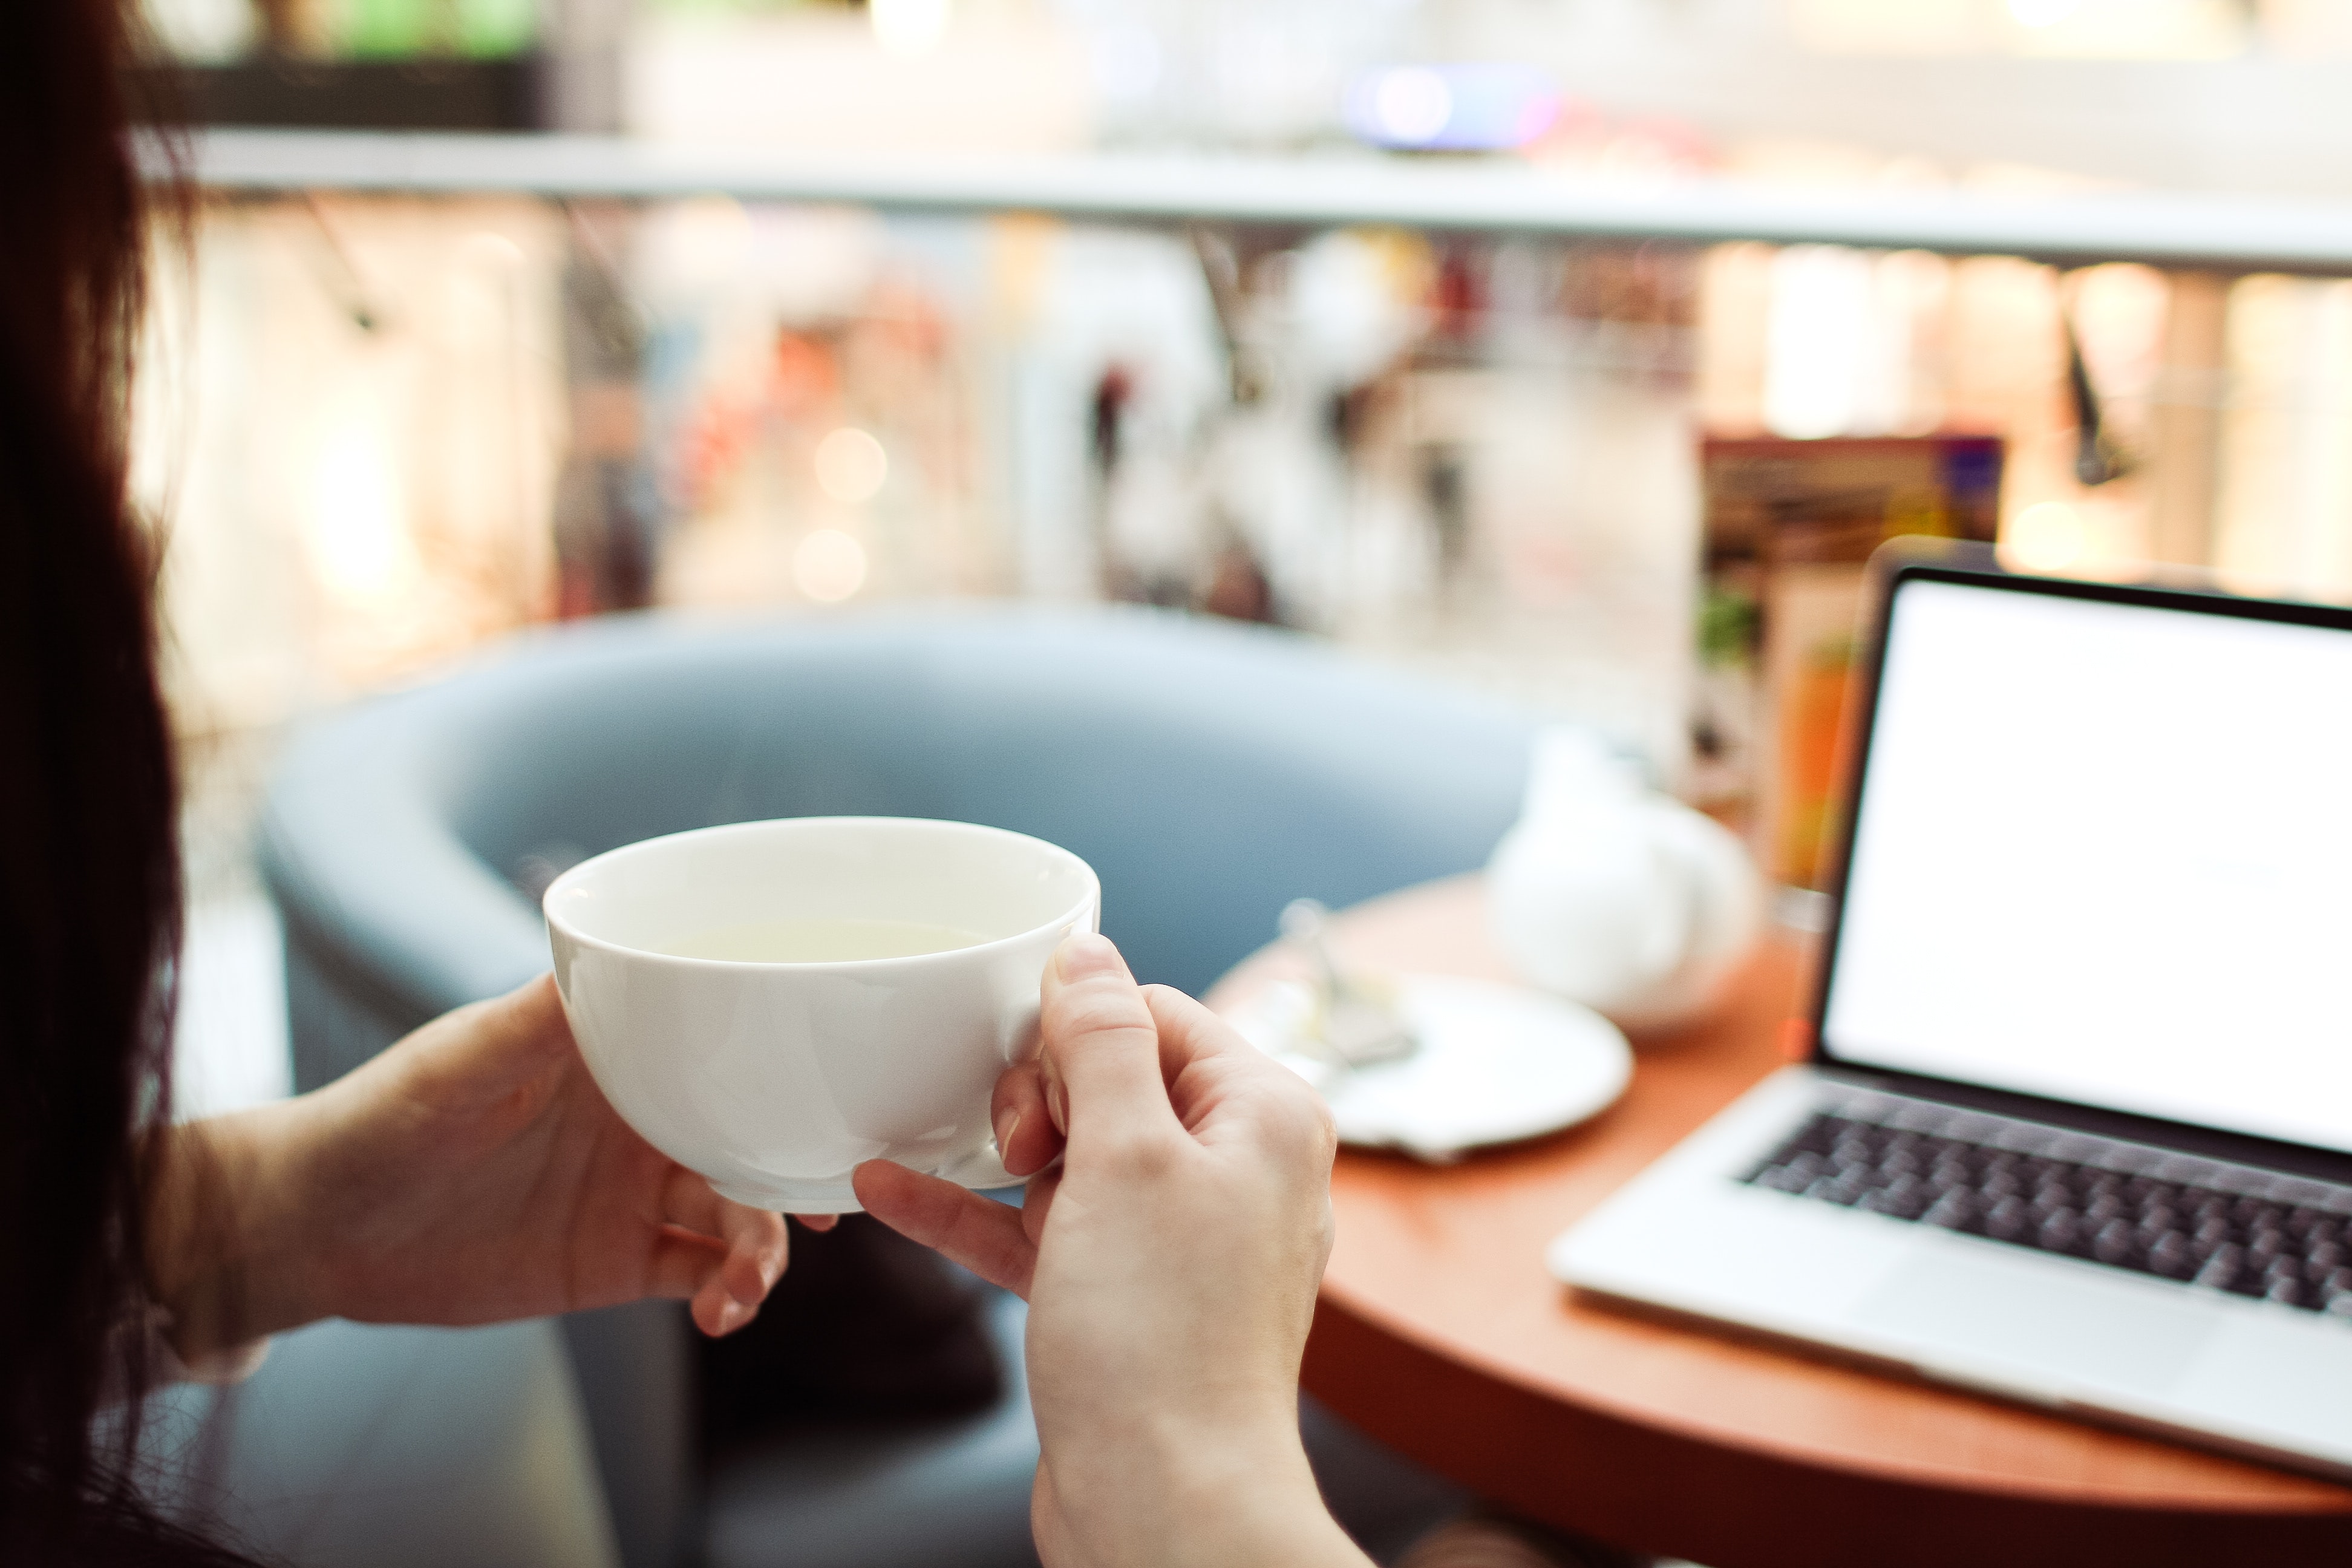 Person Holding White Ceramic Teacup in Front of a Macbook Pro, Adult, Healthy, Wireless, Technology, HQ Photo